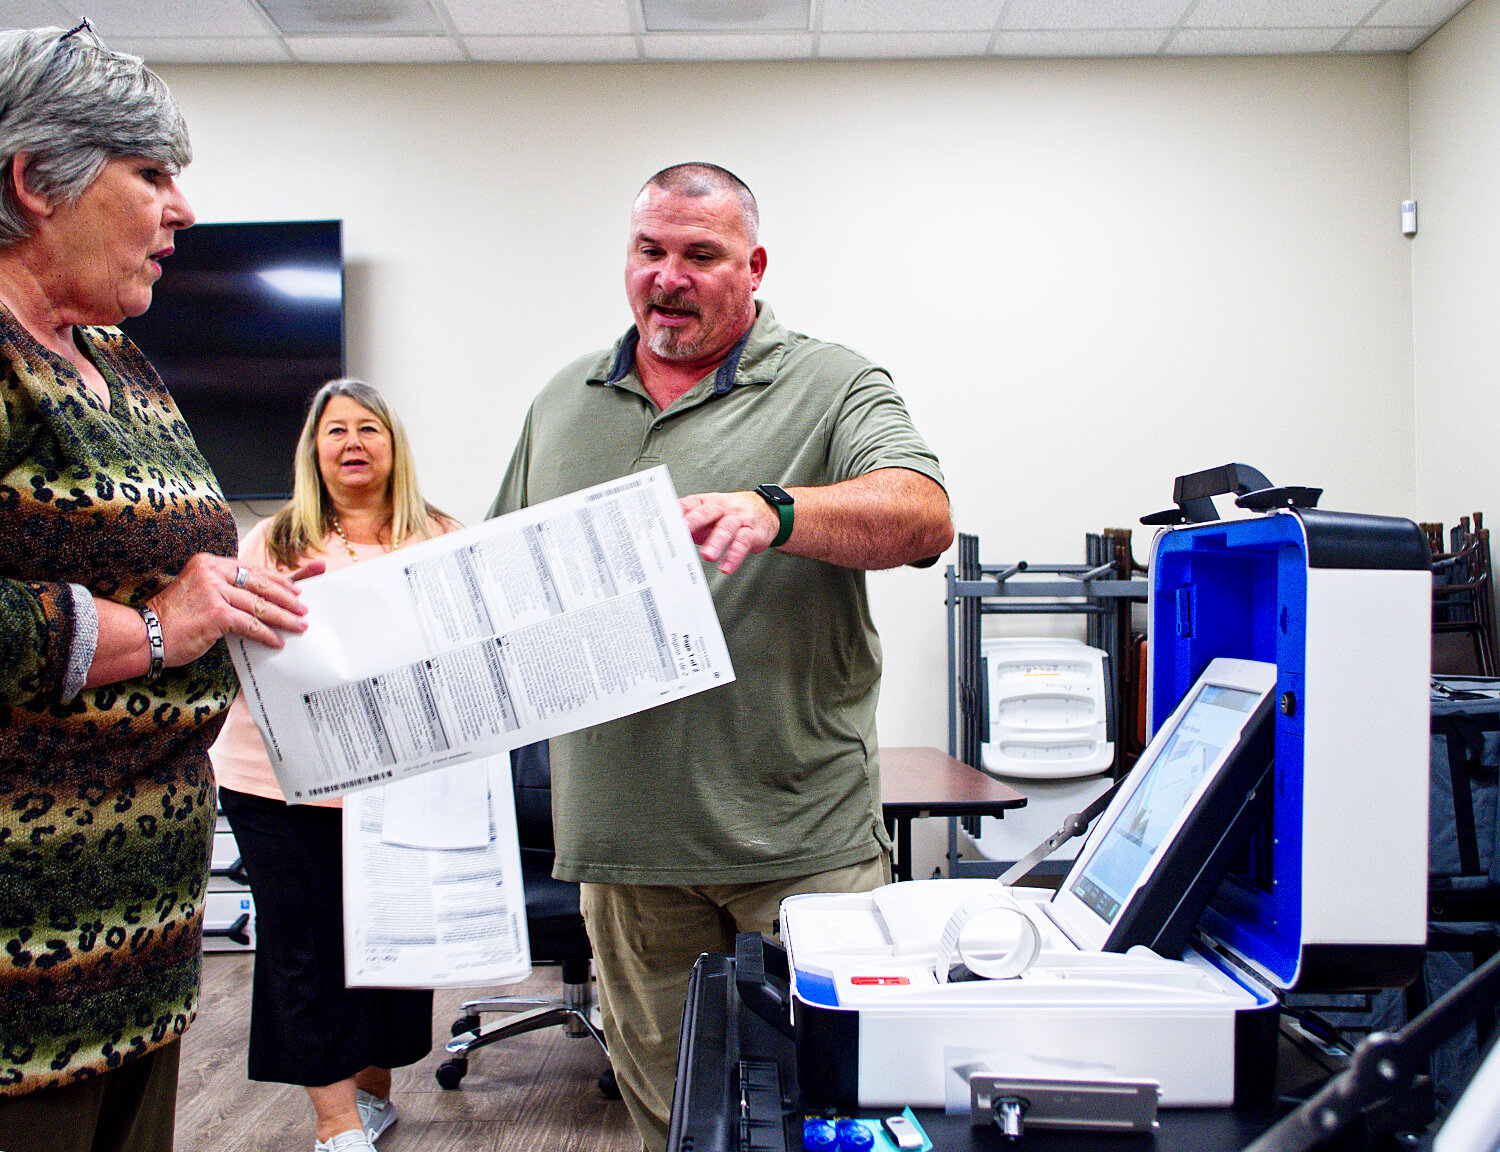 Jeremy Phillips with the Wood County elections office assists Tax Assessor Collector Carol Taylor with a test ballot as Elections Administrator Laura Wise observes.